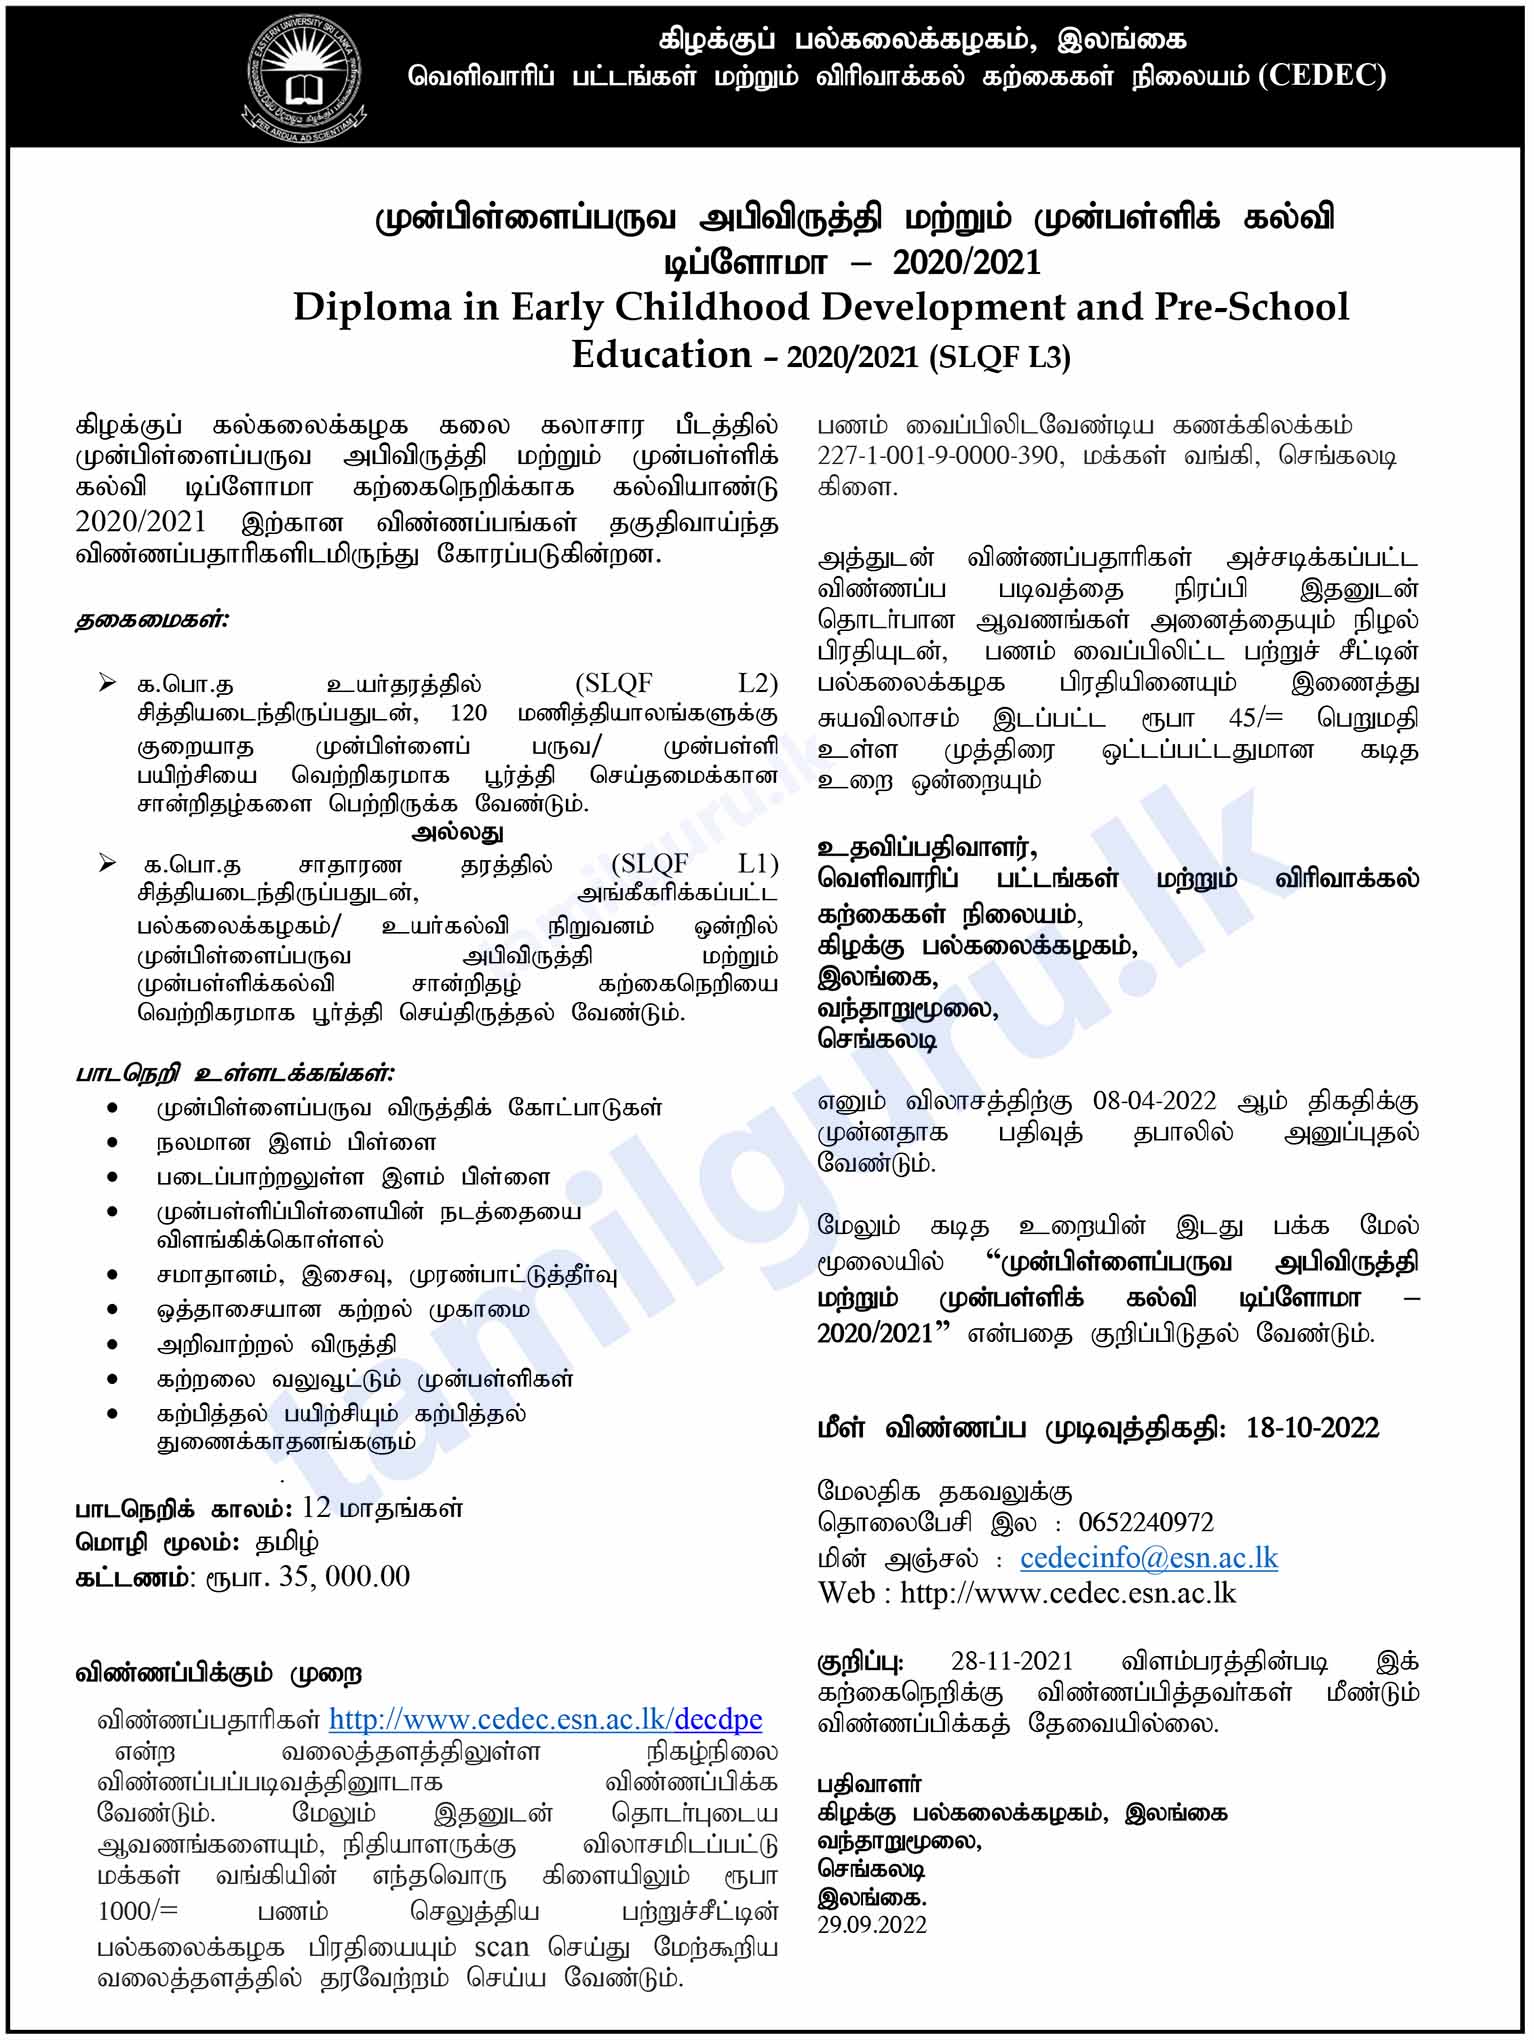 Diploma in Early Childhood Development and Pre-School Education Application (2022) - Eastern University